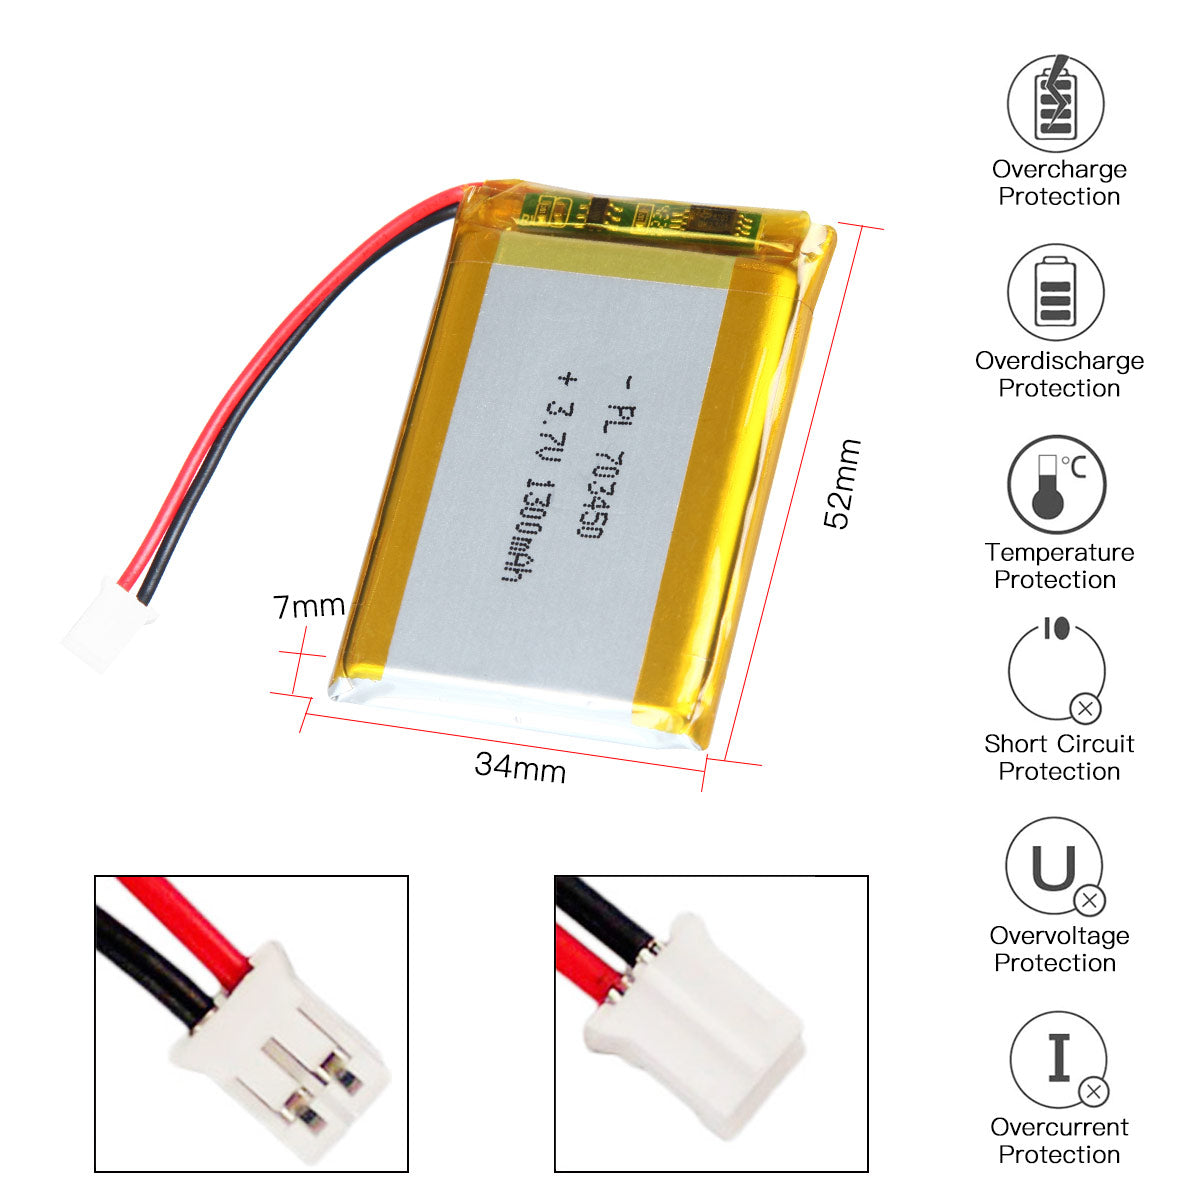 YDL 3.7V 1300mAh 703450 Rechargeable Lipo Battery with JST Connector - YDL Battery